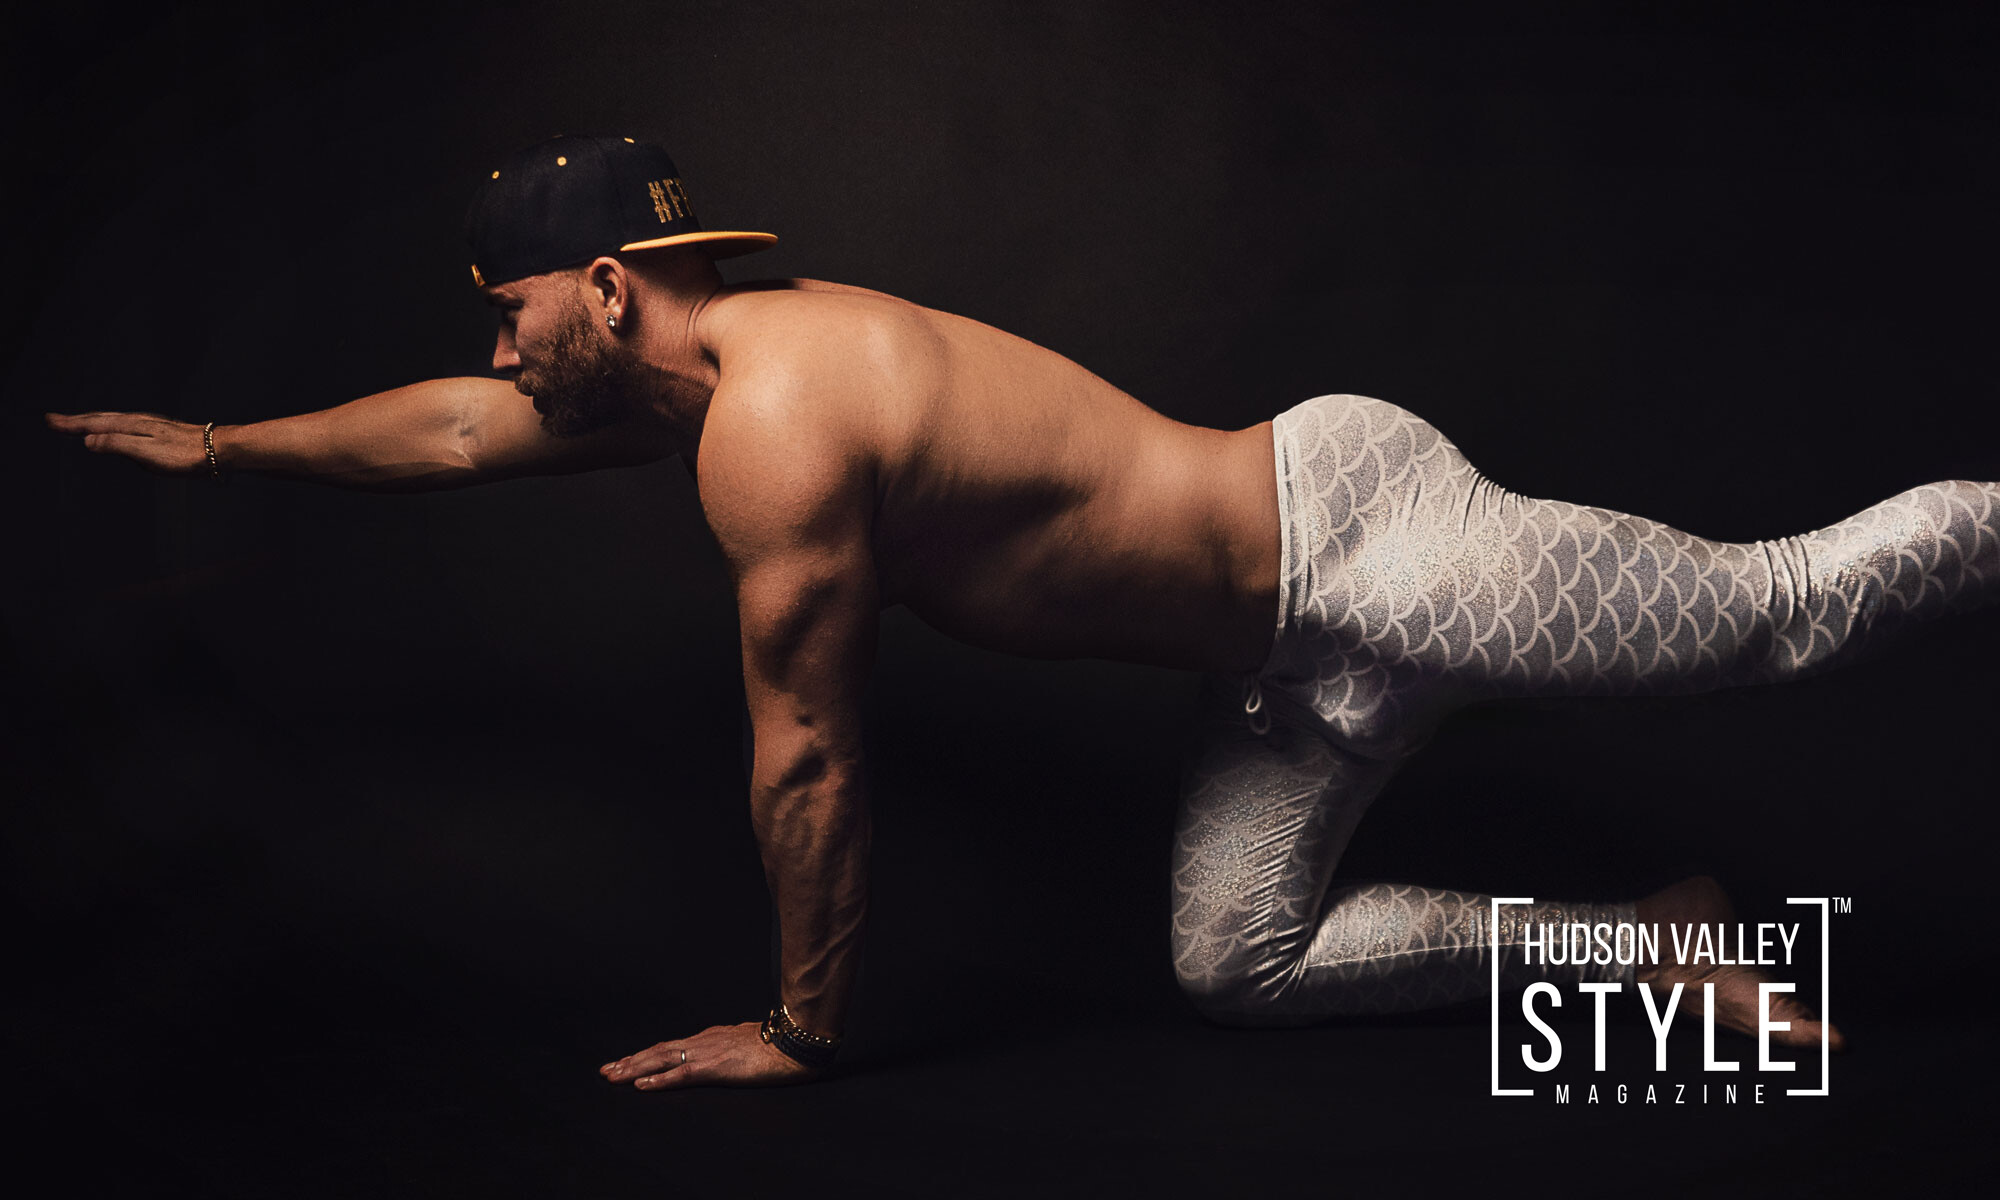 A Crowd Favorite - Hatha Yoga – Yoga 101 with Fitness Trainer, OnlyFans Fitness Model Maxwell Alexander – Photography by Duncan Avenue Studios – Presented by "Introduction to Yoga and Meditation" Book by Maxwell Alexander